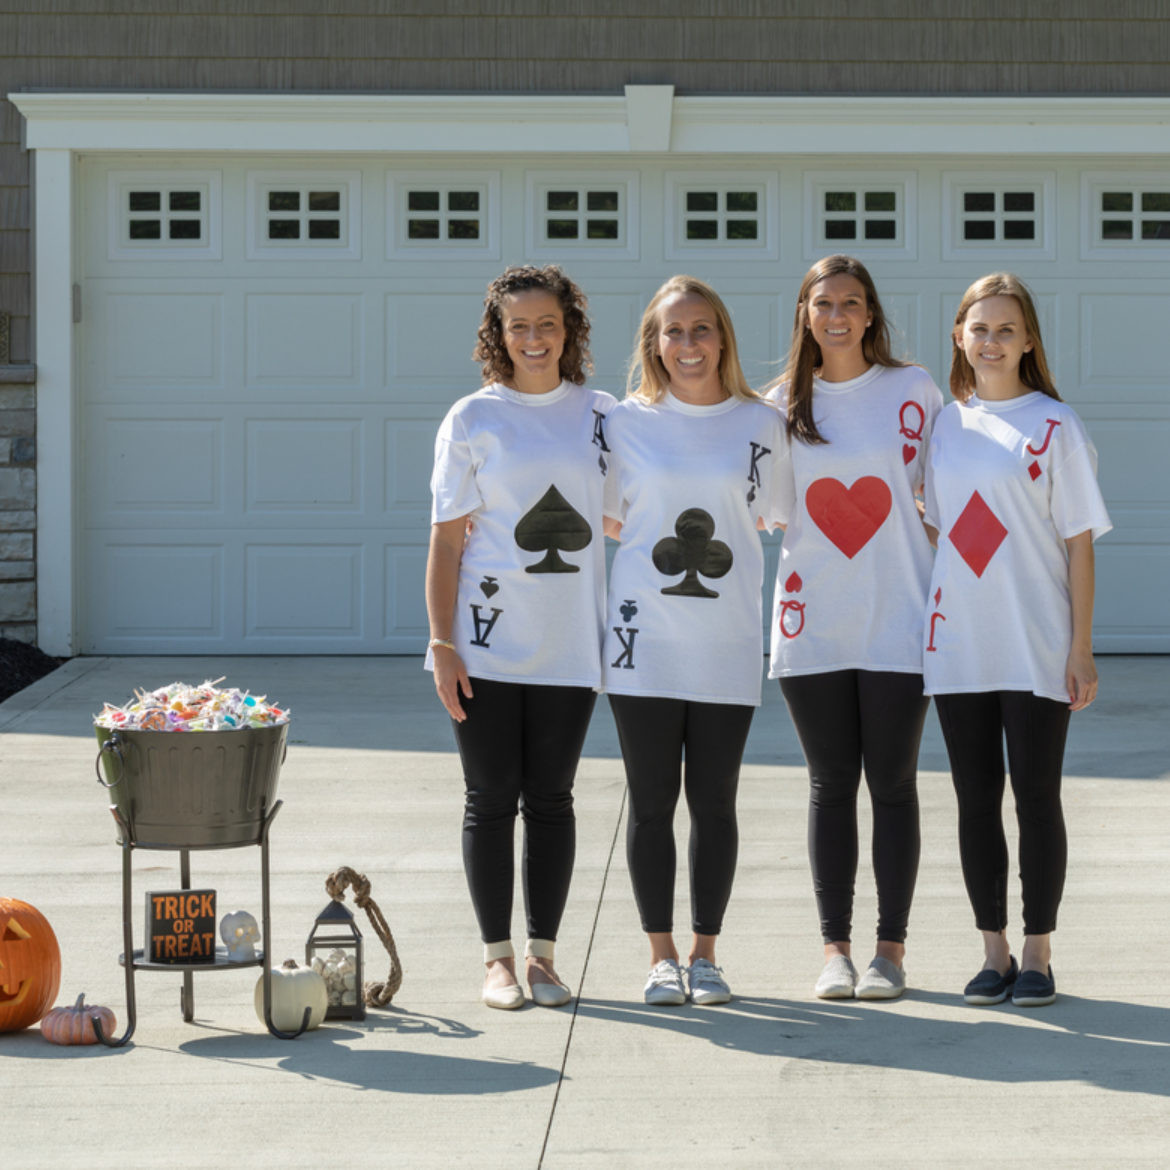 Deck Of Cards Halloween Costumes
 DIY How to make a playing card costume out of Duck Tape